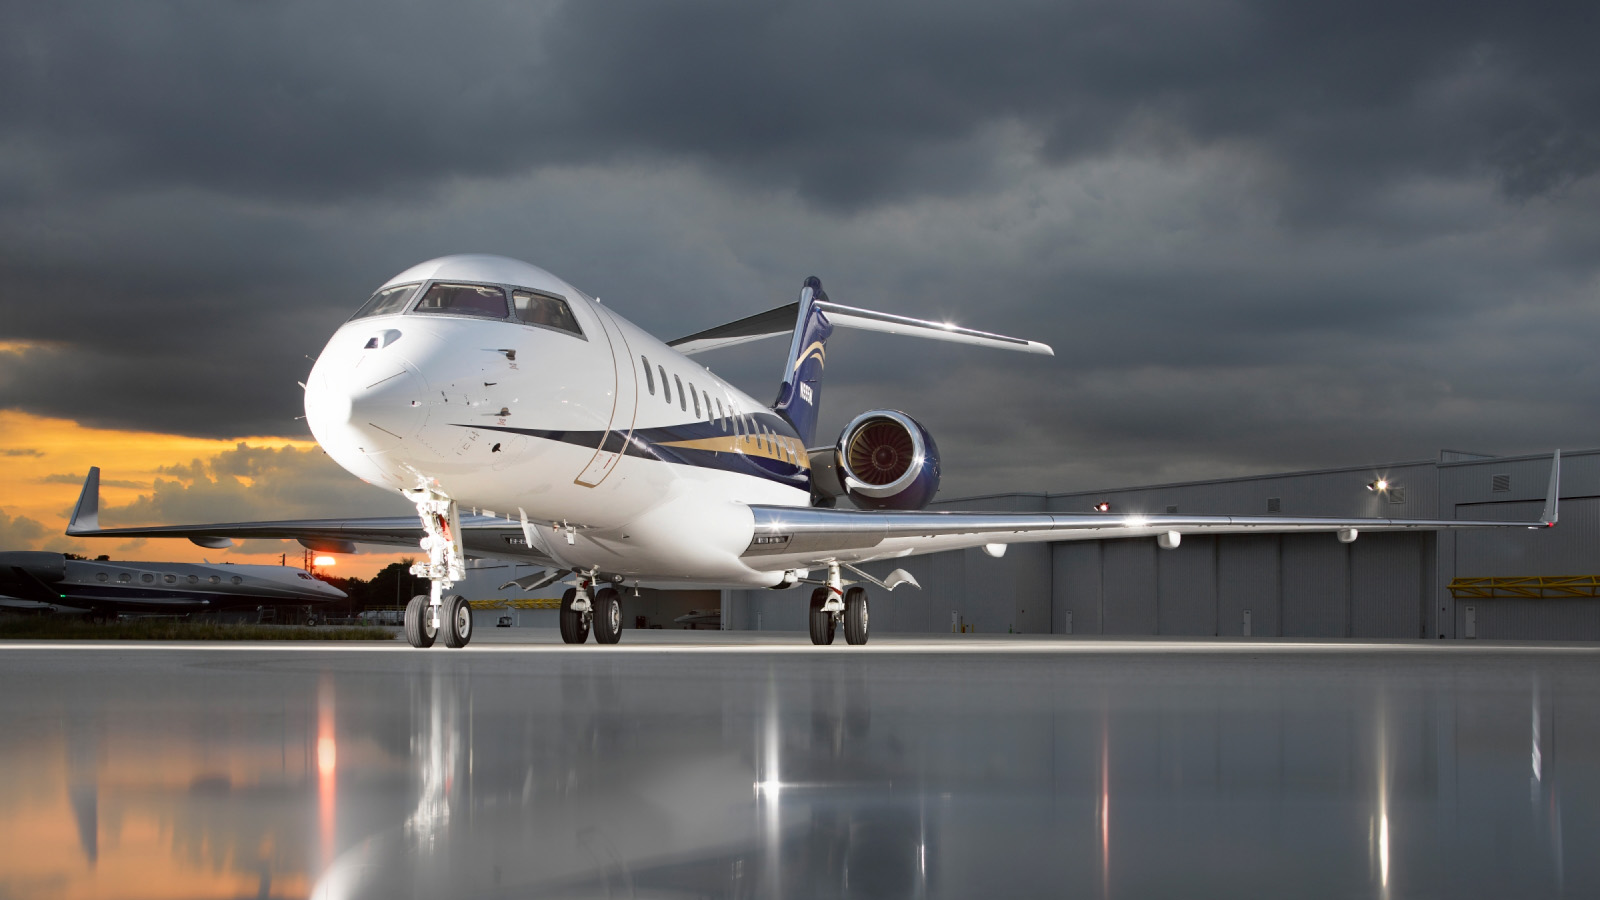 2009 Bombardier Global XRS Private Jet For Sale From Southern Cross On AvPay aircraft exterior 1